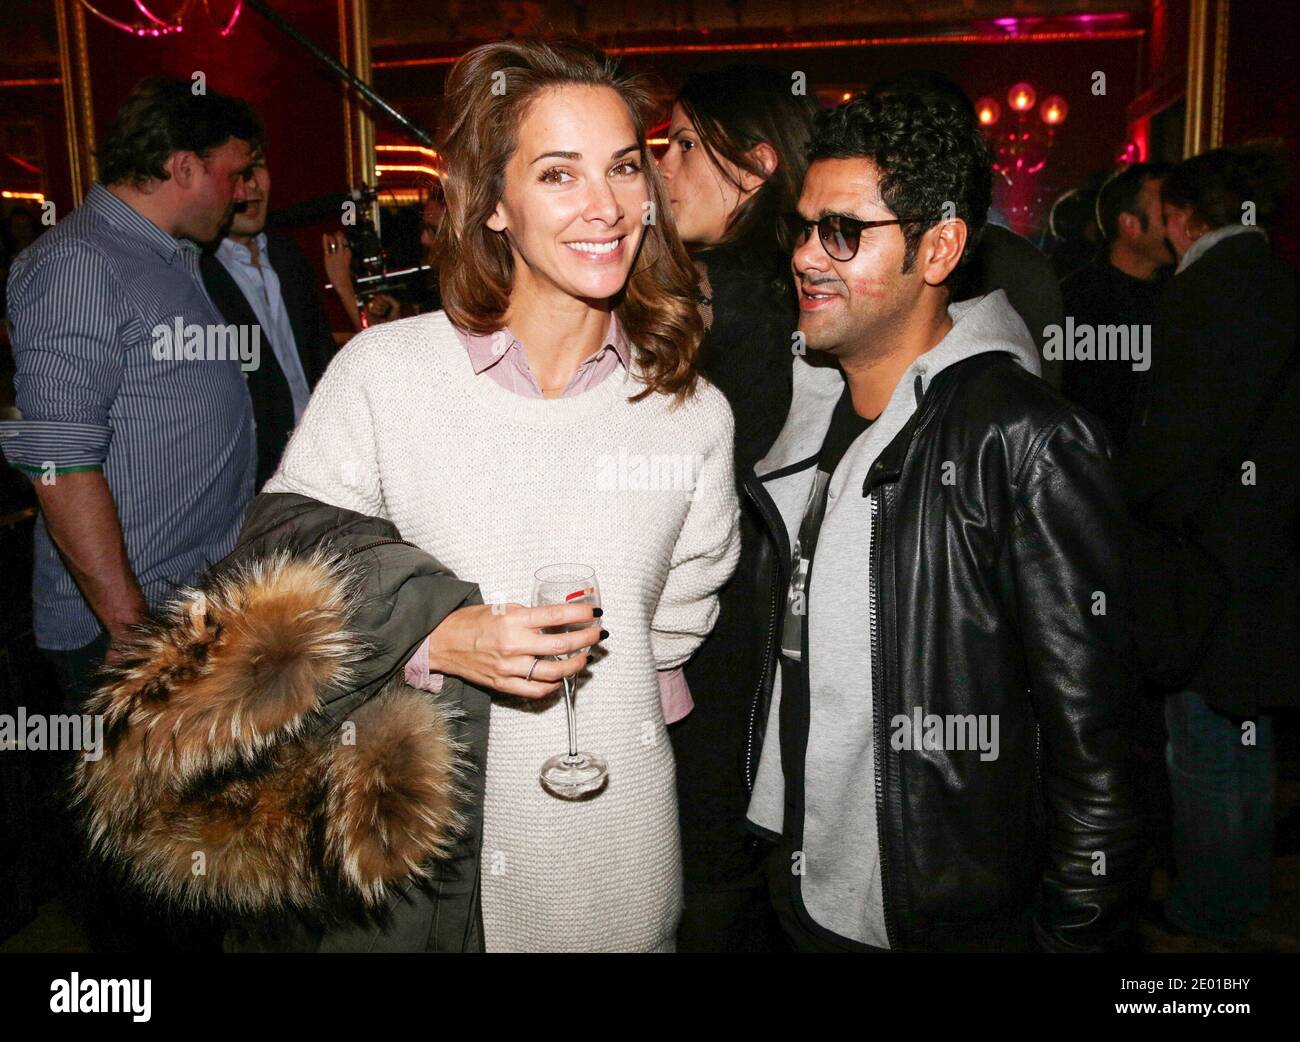 Jamel Debbouze and his wife Melissa Theuriau attending the Prix Fooding 2014 at the 'Cirque d'hiver' in Paris, France on November 25, 2013. Photo by Jerome Domine/ABACAPRESS.COM Stock Photo